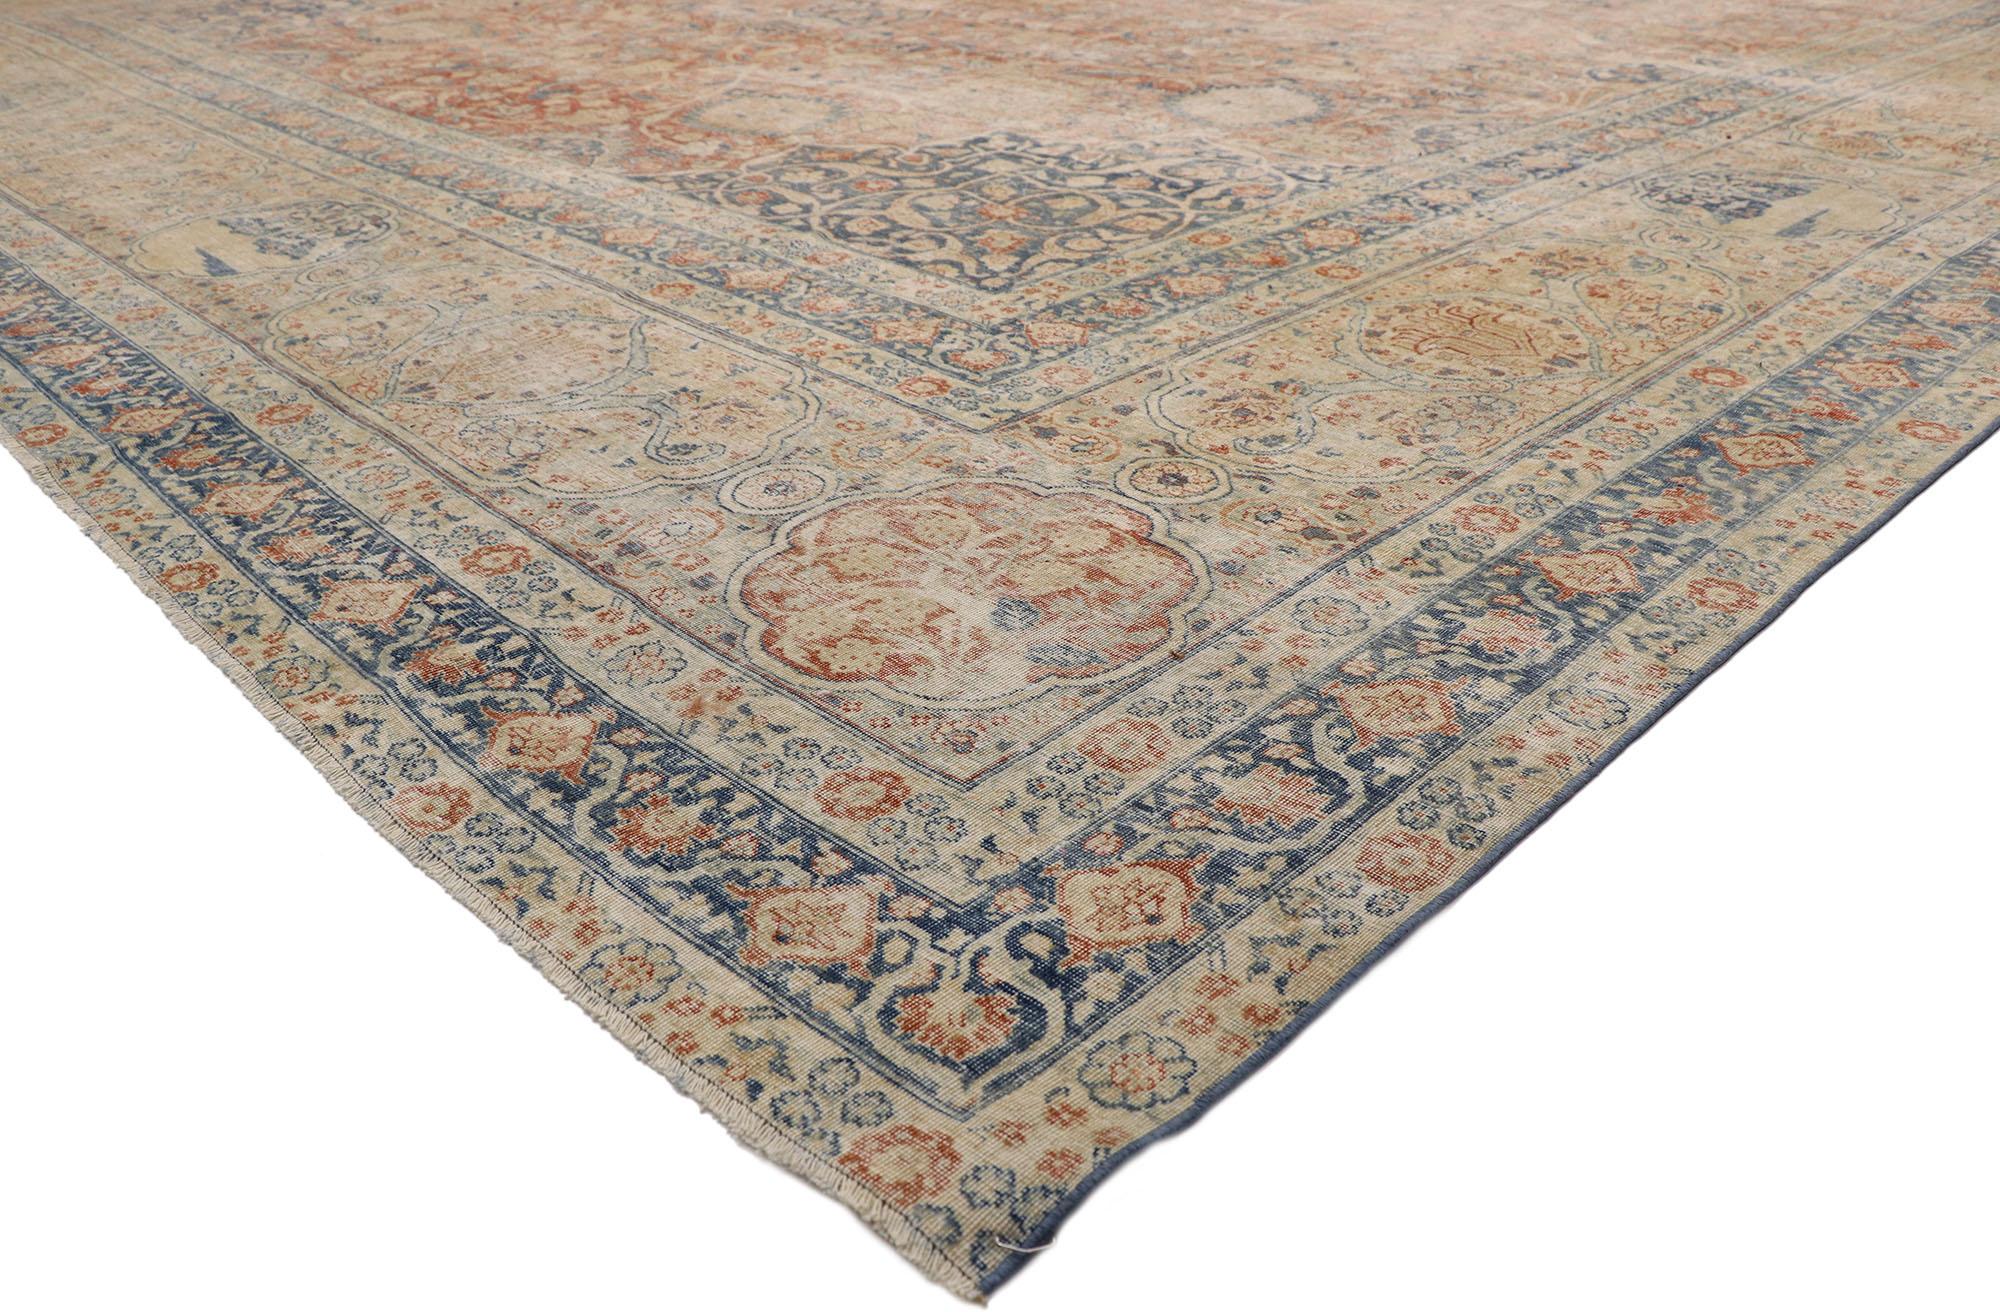 76692 Distressed Antique Persian Tabriz Palace Rug with Rustic Relaxed Federal Style and The Ardabil Carpet Design 15'00 x 21'08. Balancing a timeless floral design with traditional sensibility and a lovingly timeworn patina, this hand-knotted wool